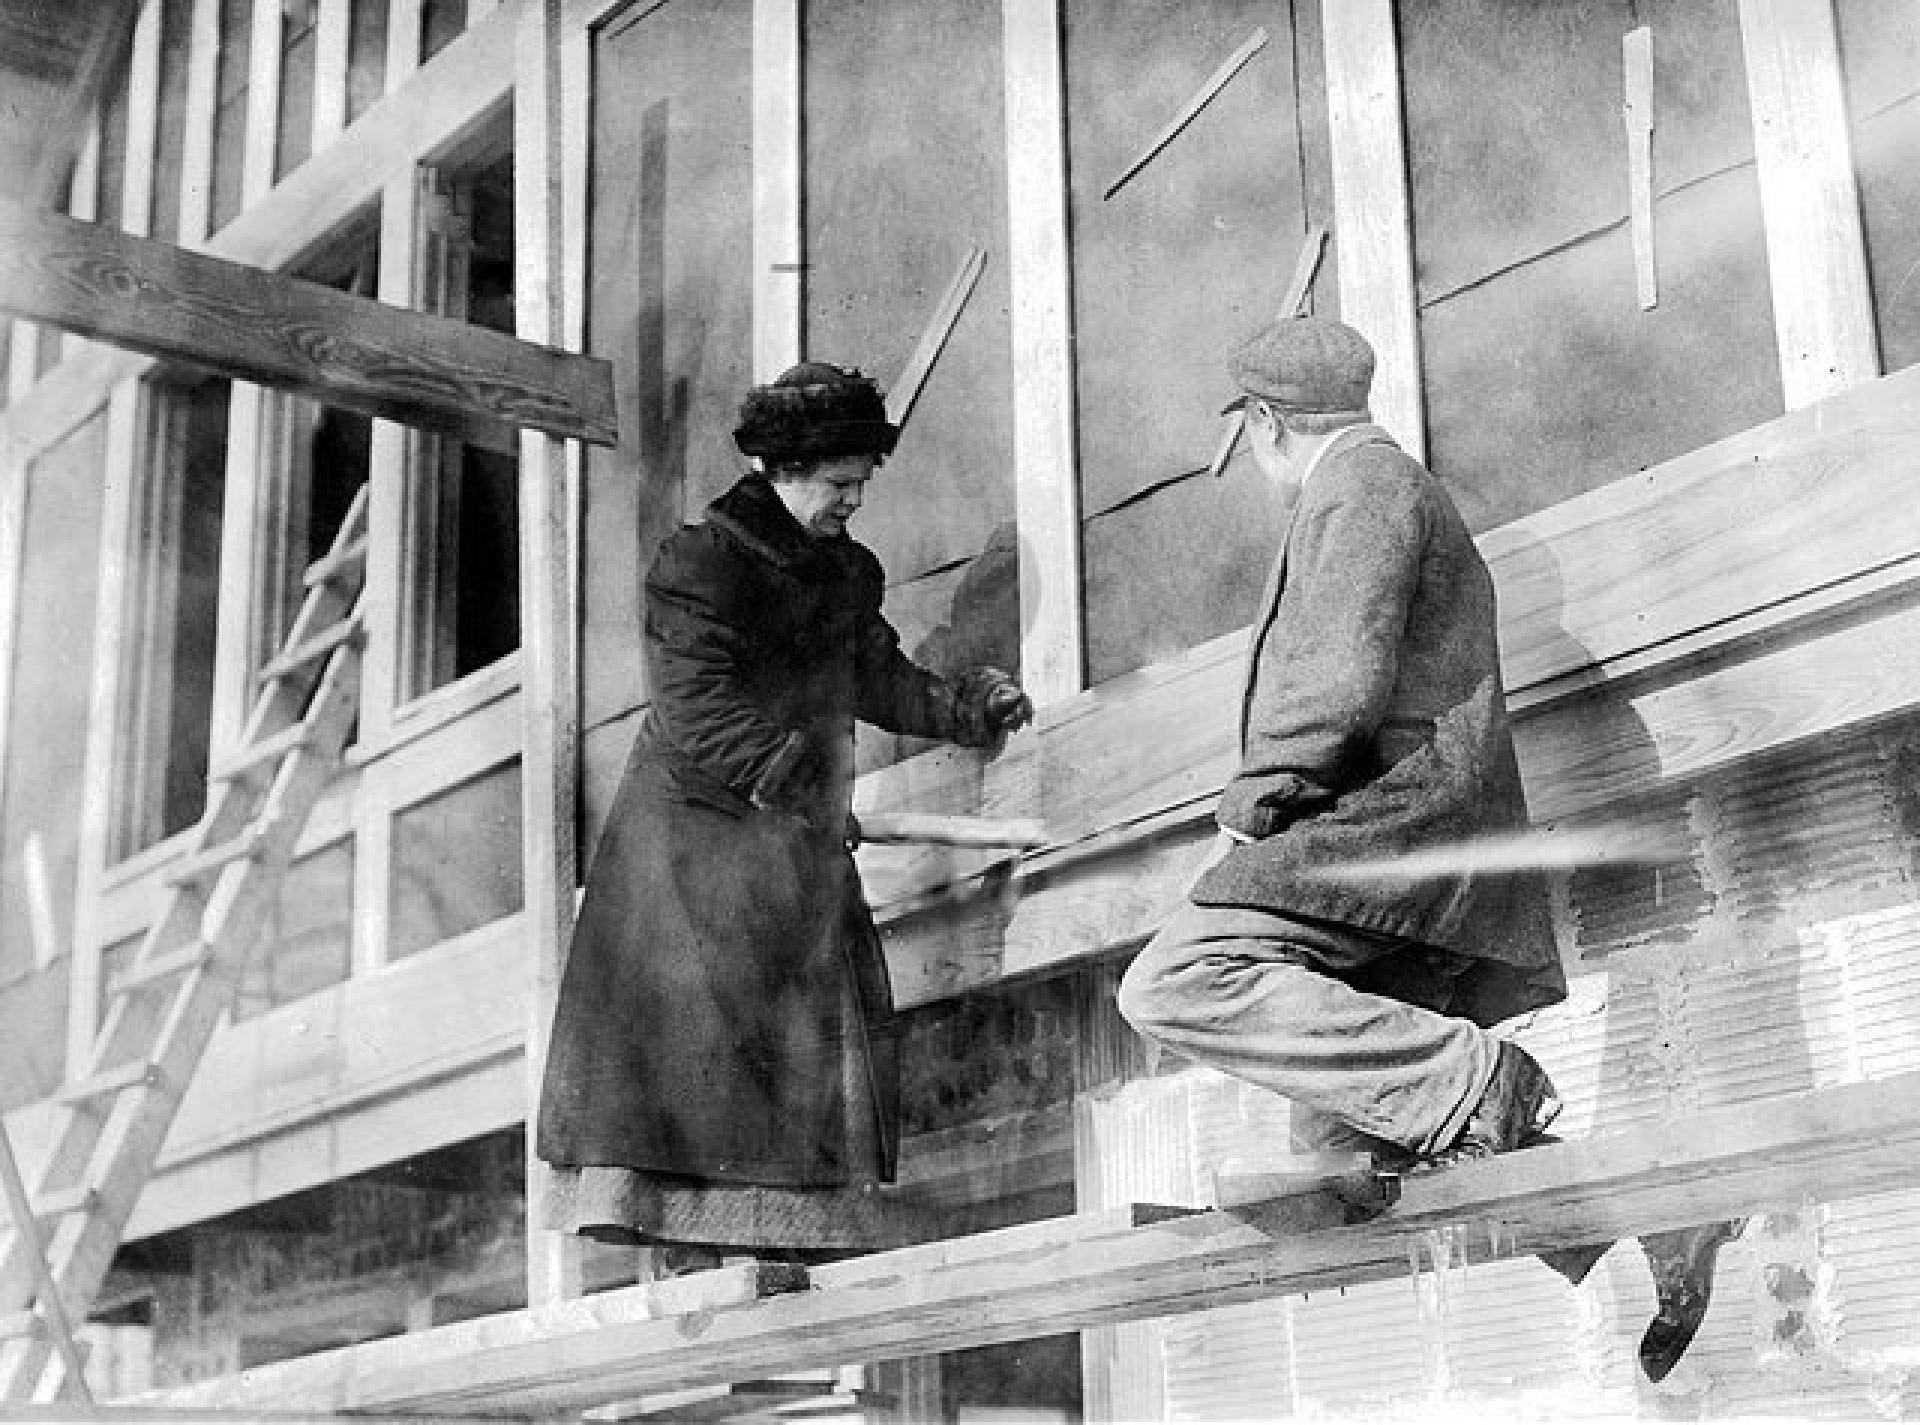 Fay Kellogg was the foremost woman architect in the United States specialized in steel construction. | Photo via Un dia una arquitecta